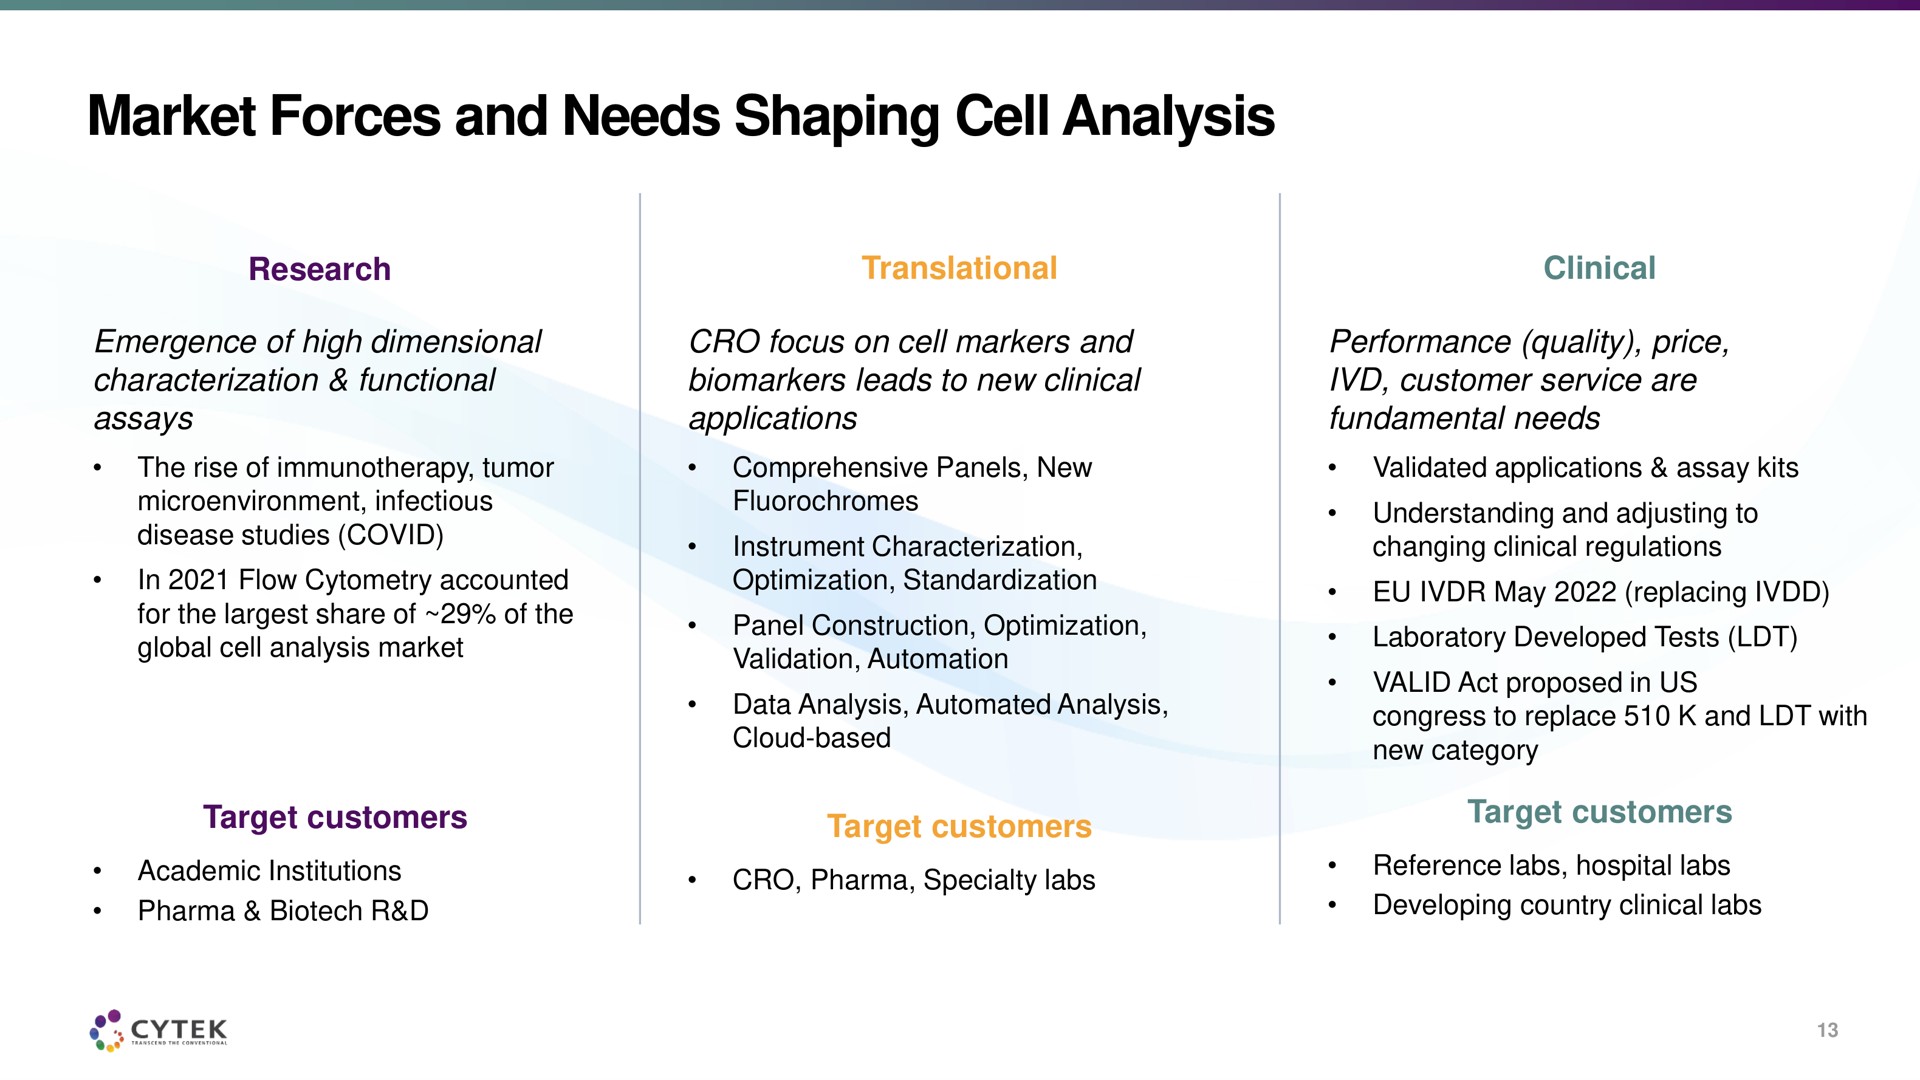 market forces and needs shaping cell analysis | Cytek